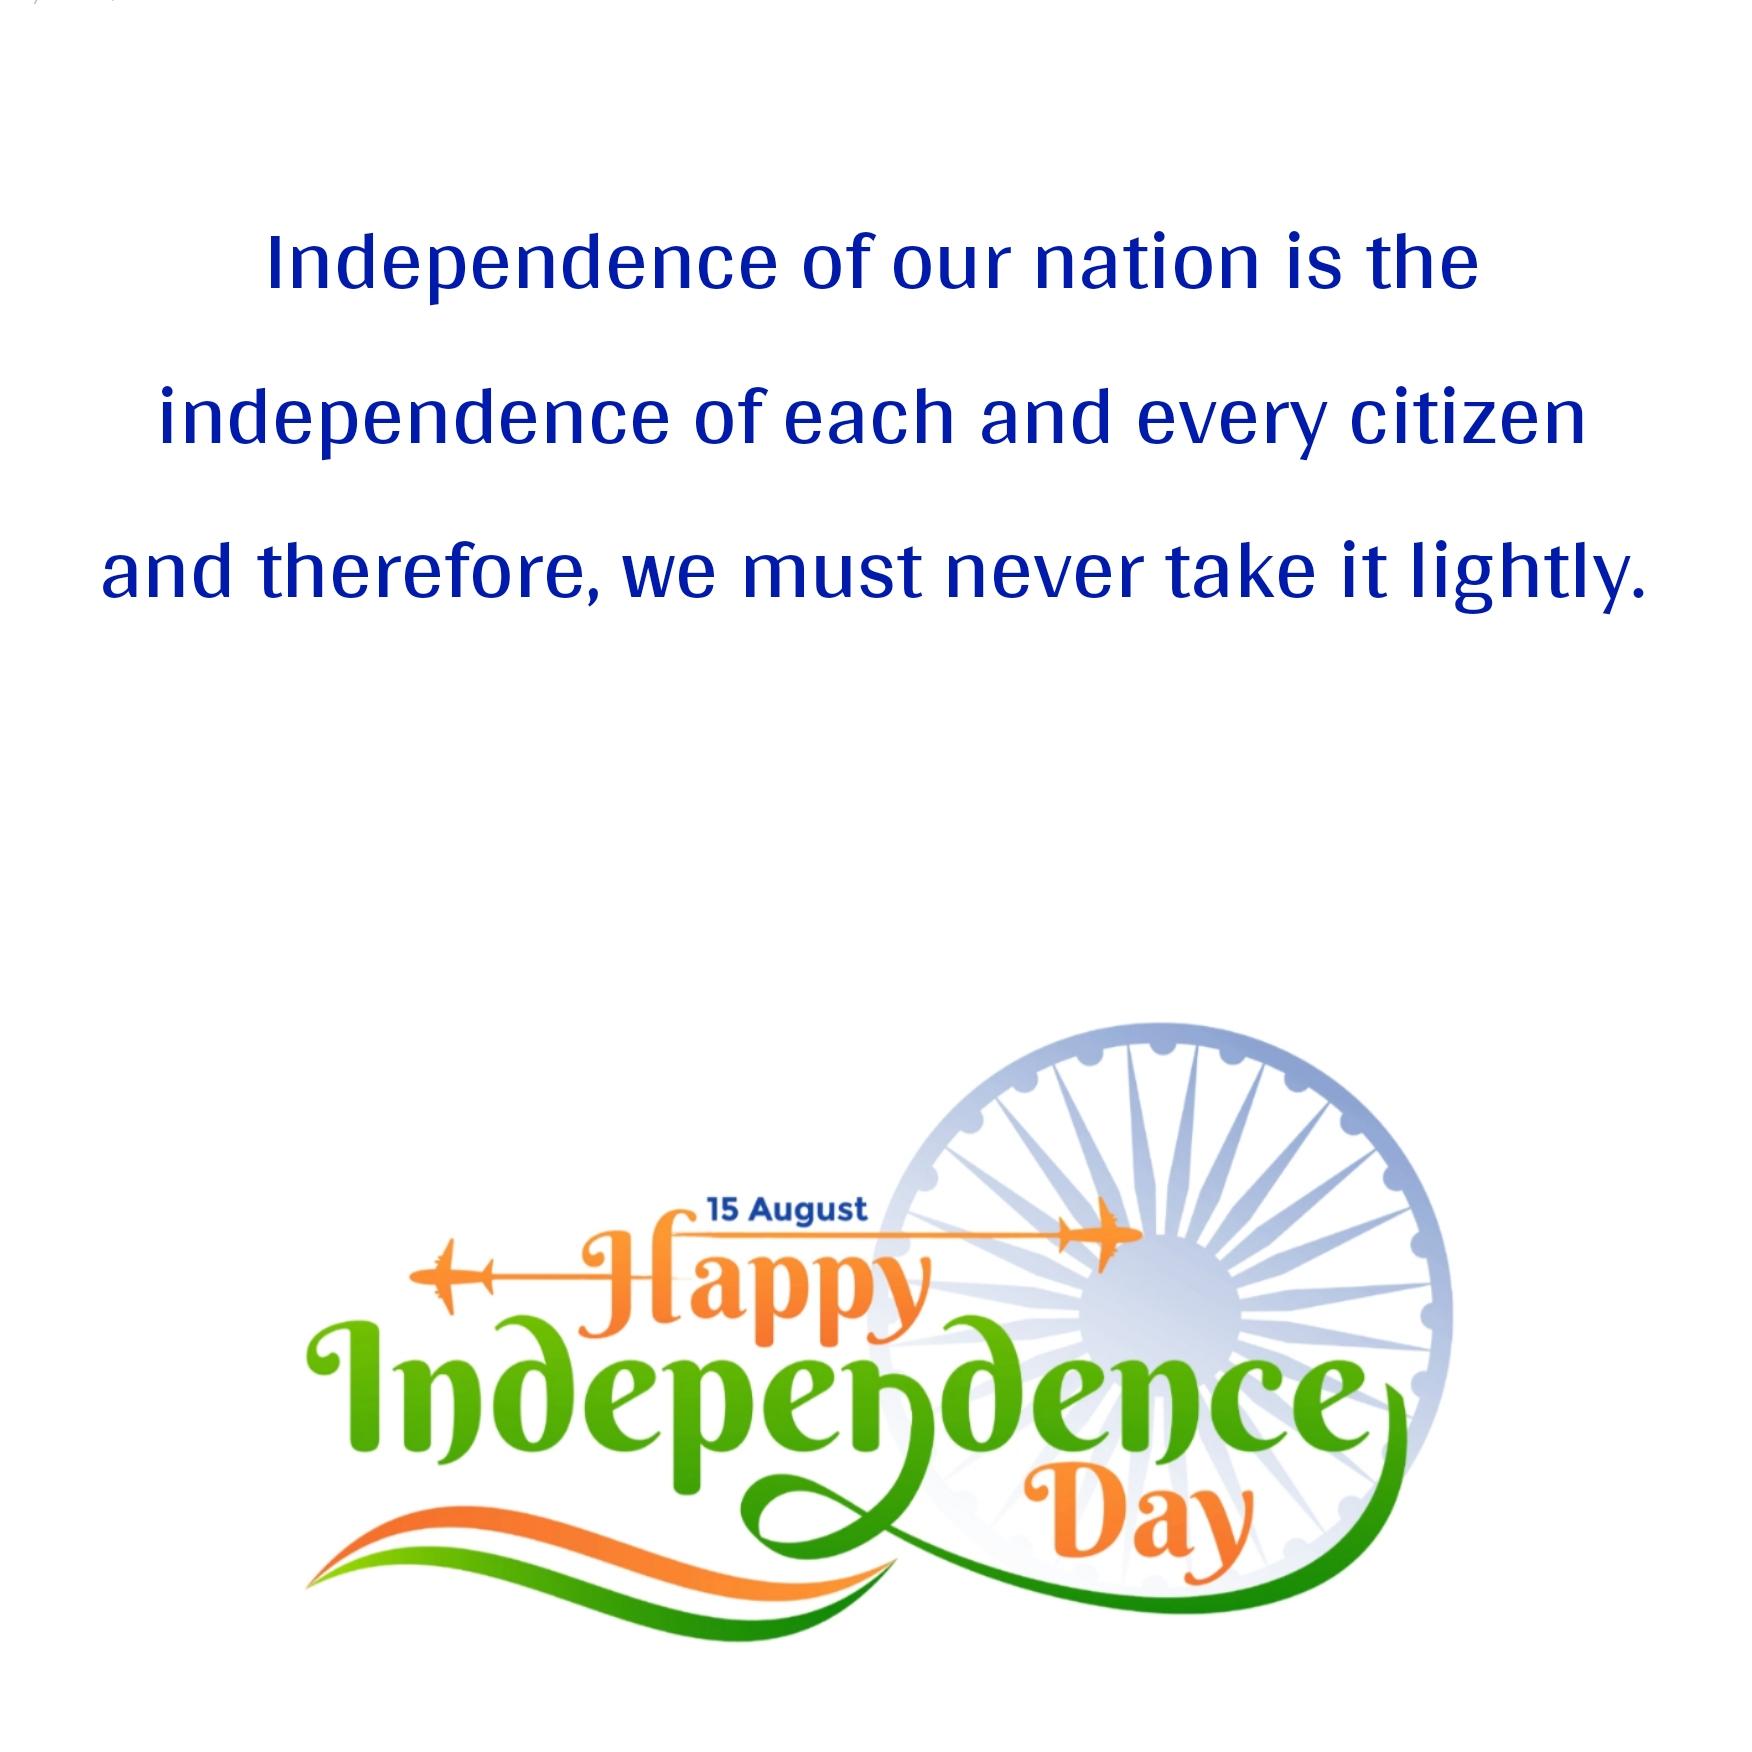 The independence of our nation is the independence of